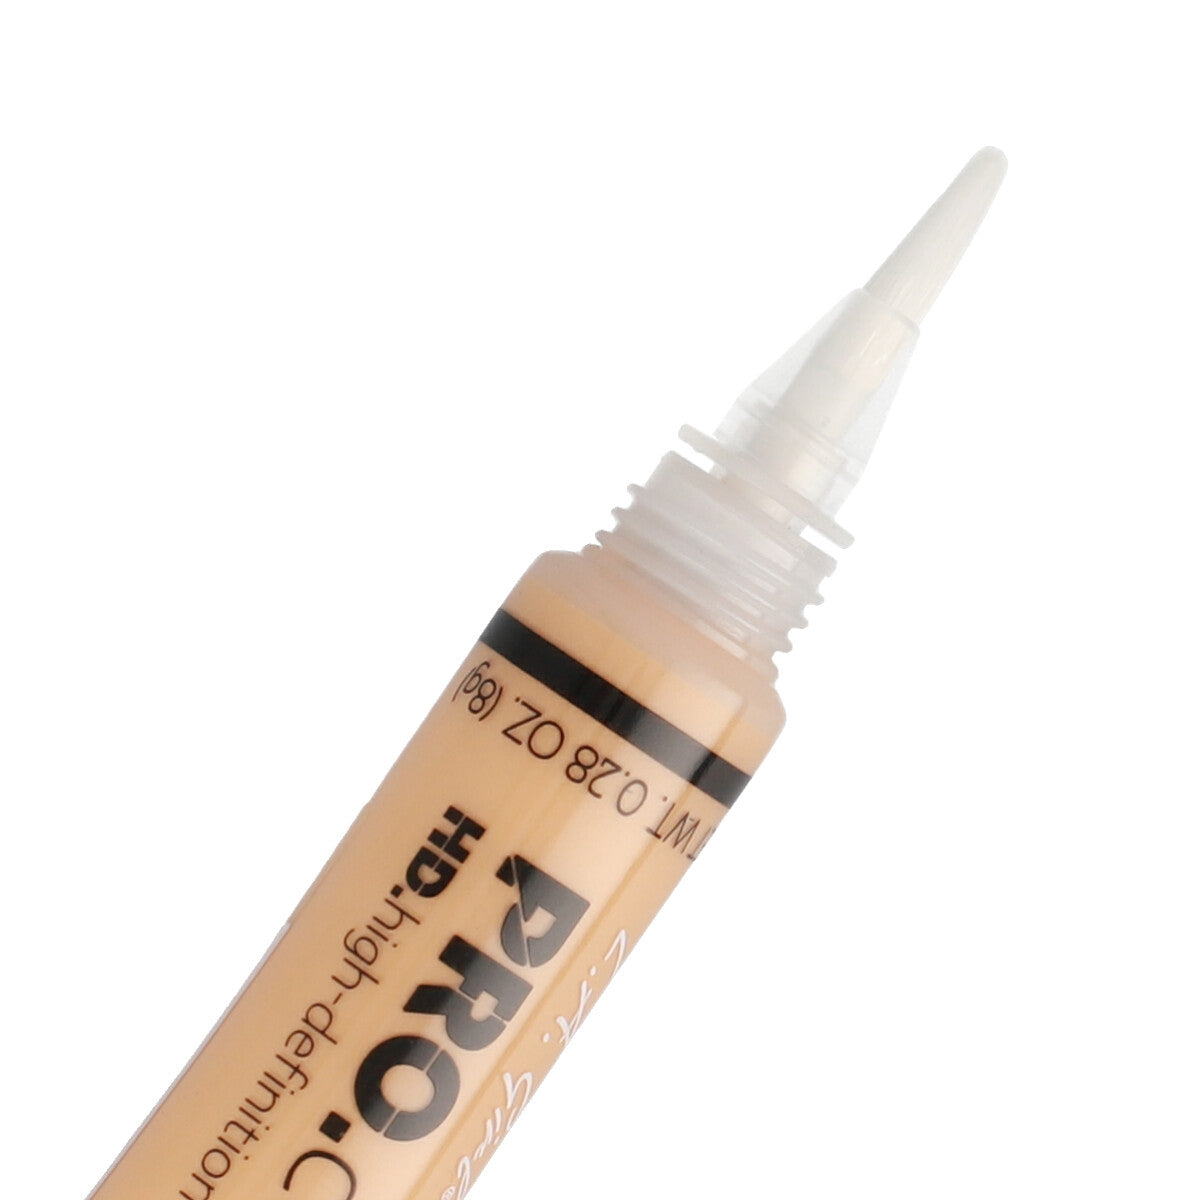 HD PRO. Conceal Yellow Corrector